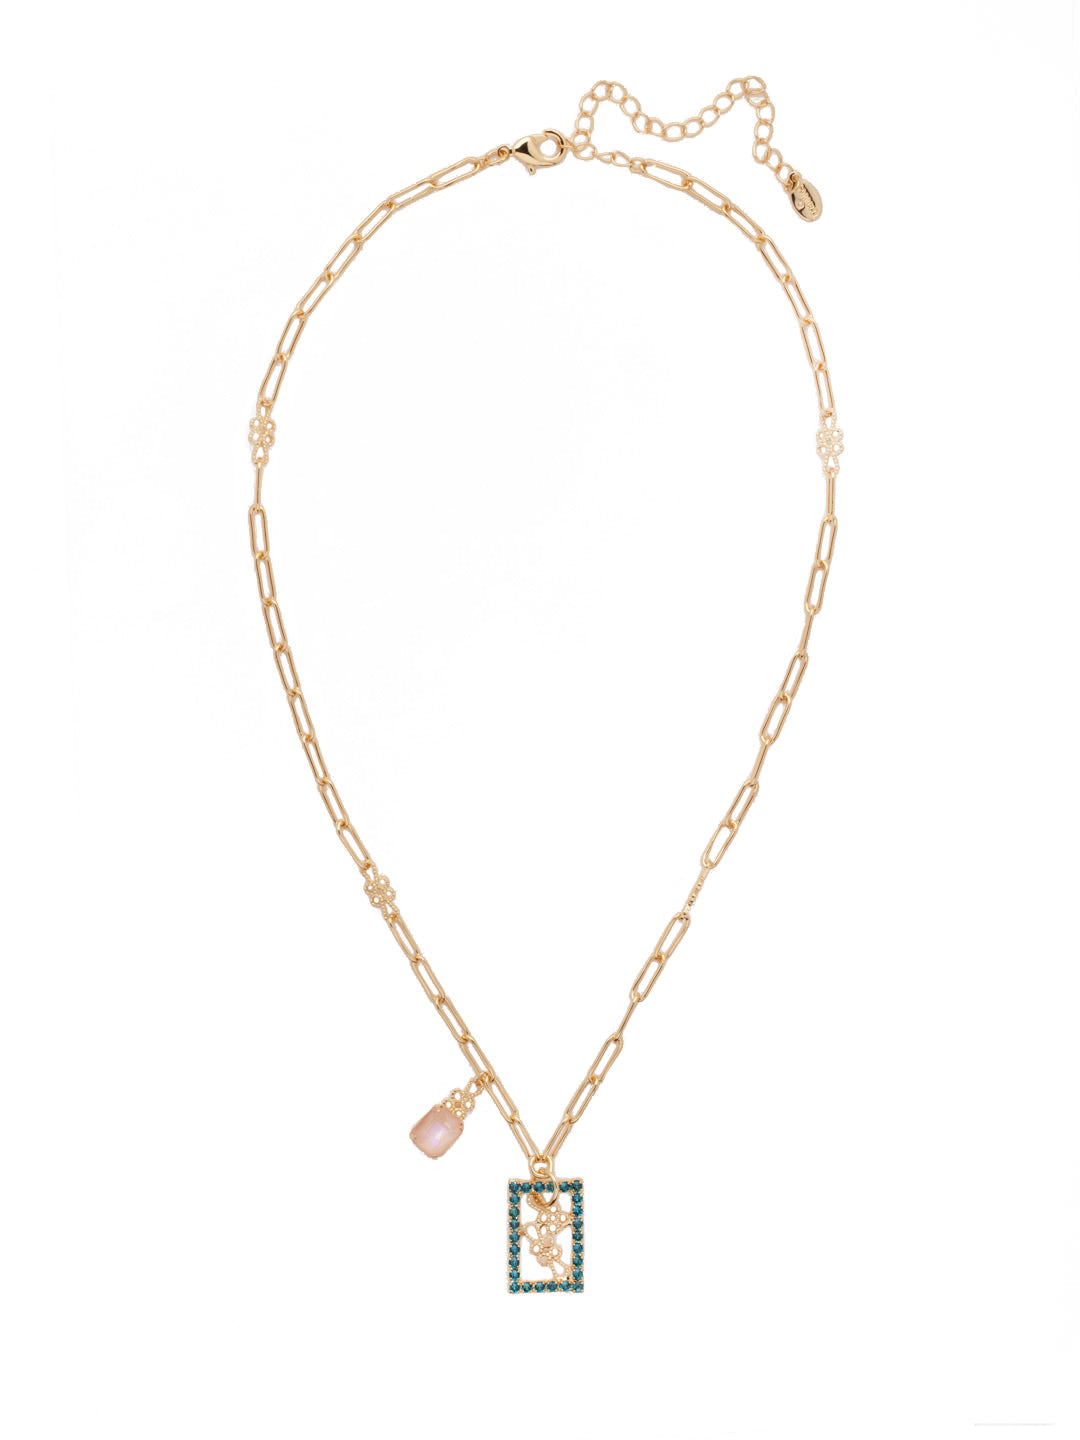 Crystal LV Pendant Necklace